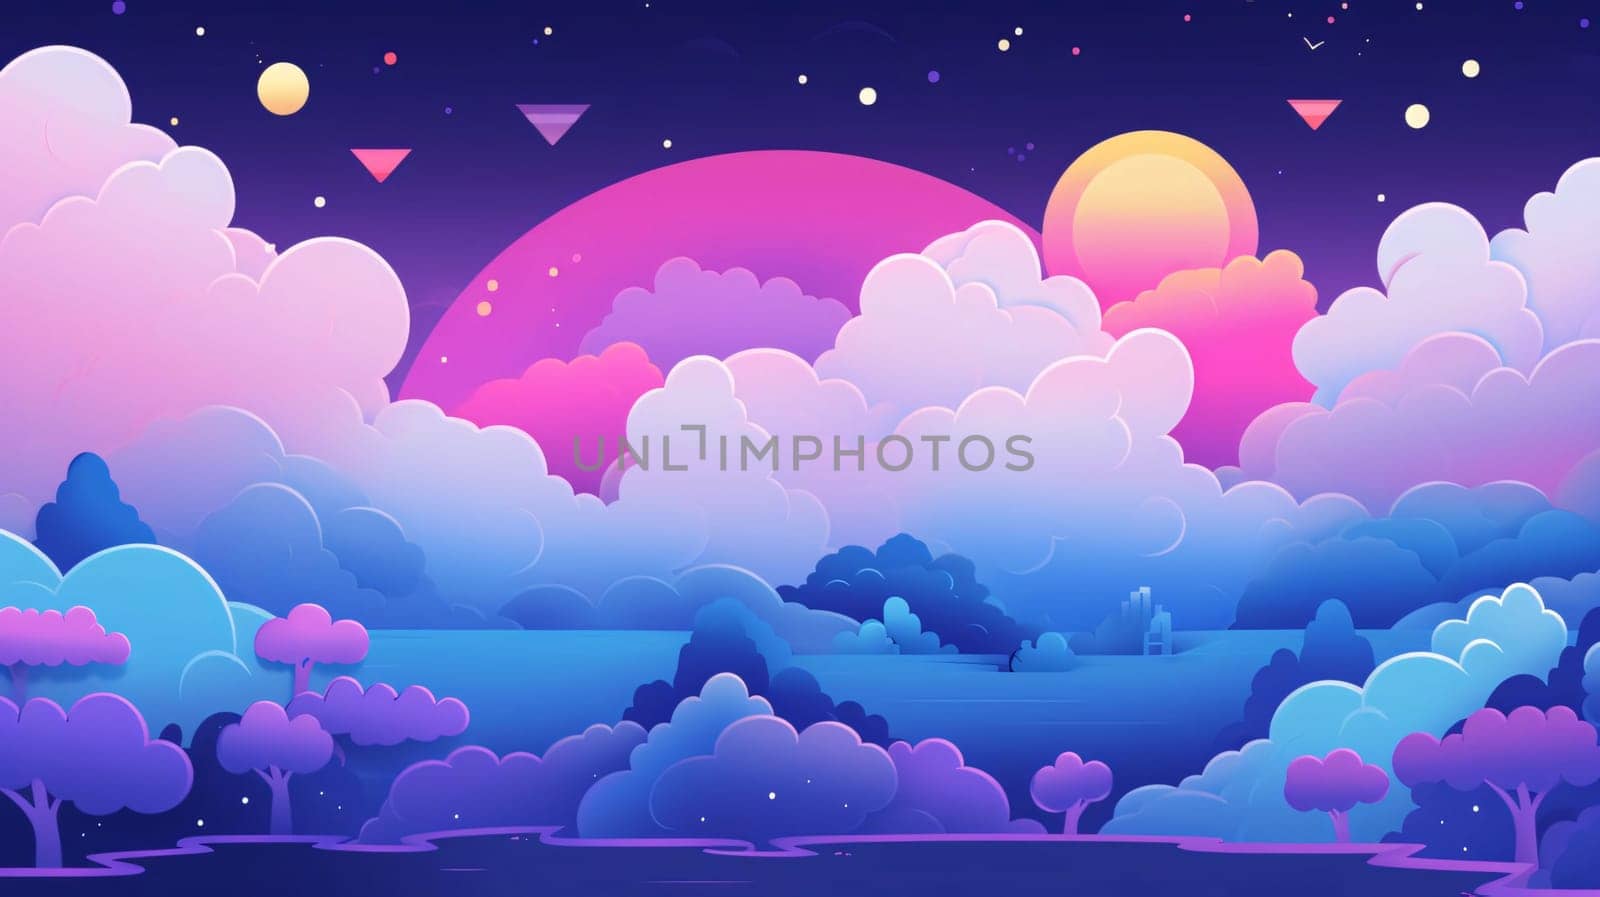 Banner: Night landscape with clouds, sun, moon and stars. Vector illustration.